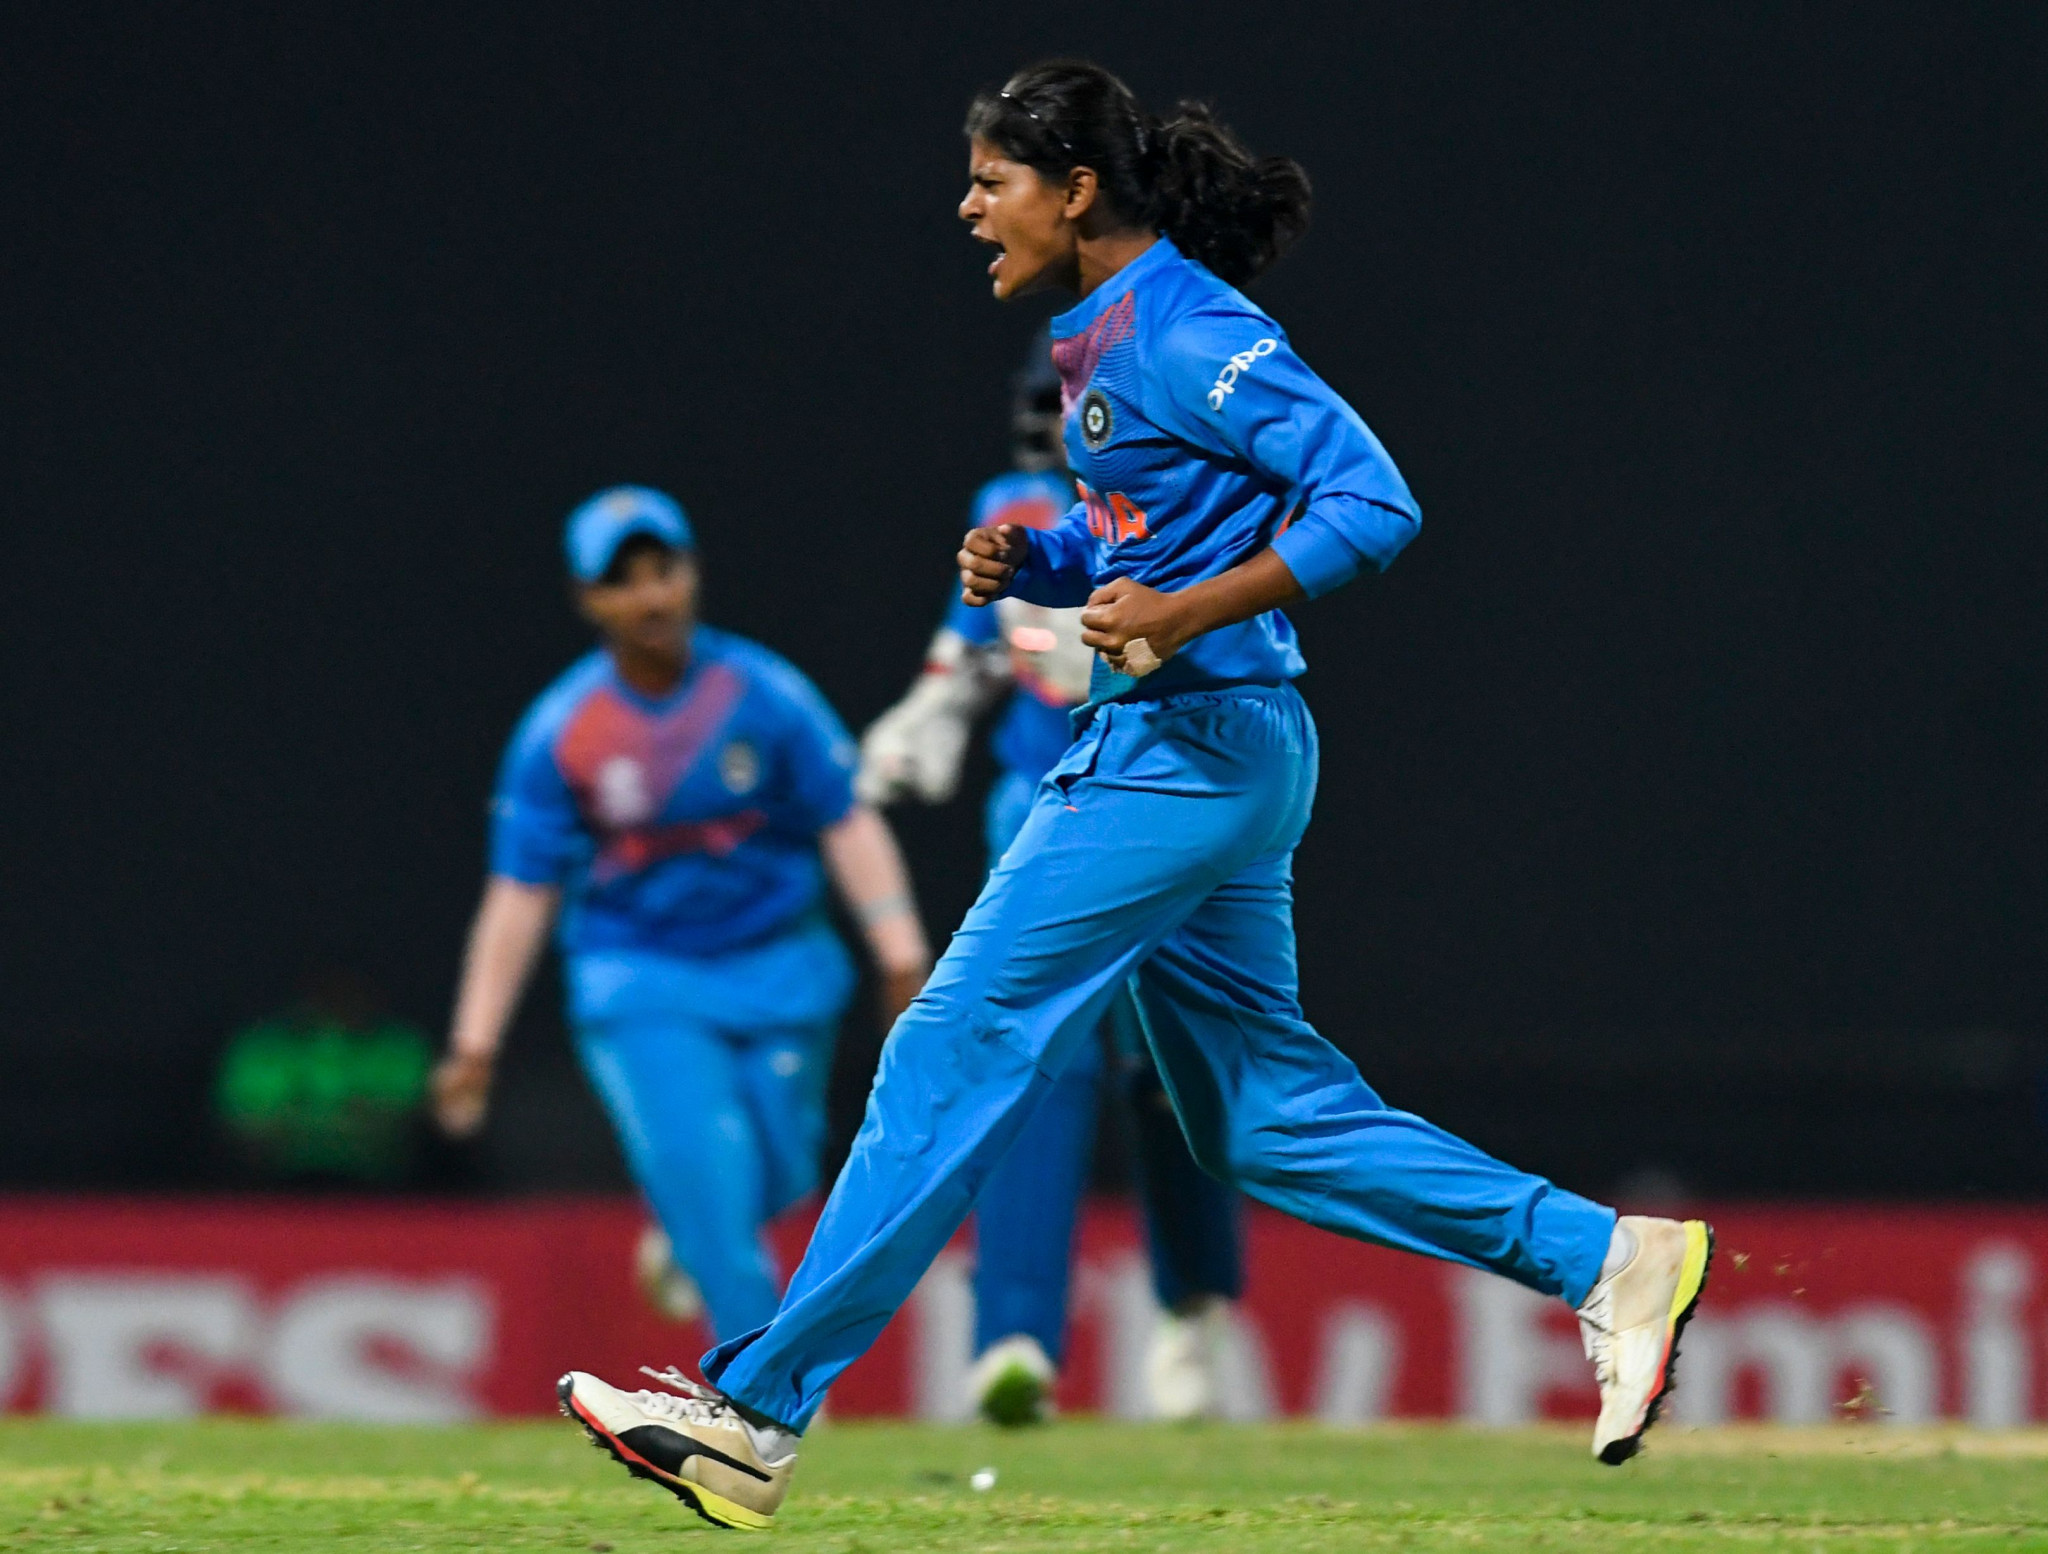 Raman appointed as head coach of Indian women's cricket team despite Kirsten being first choice